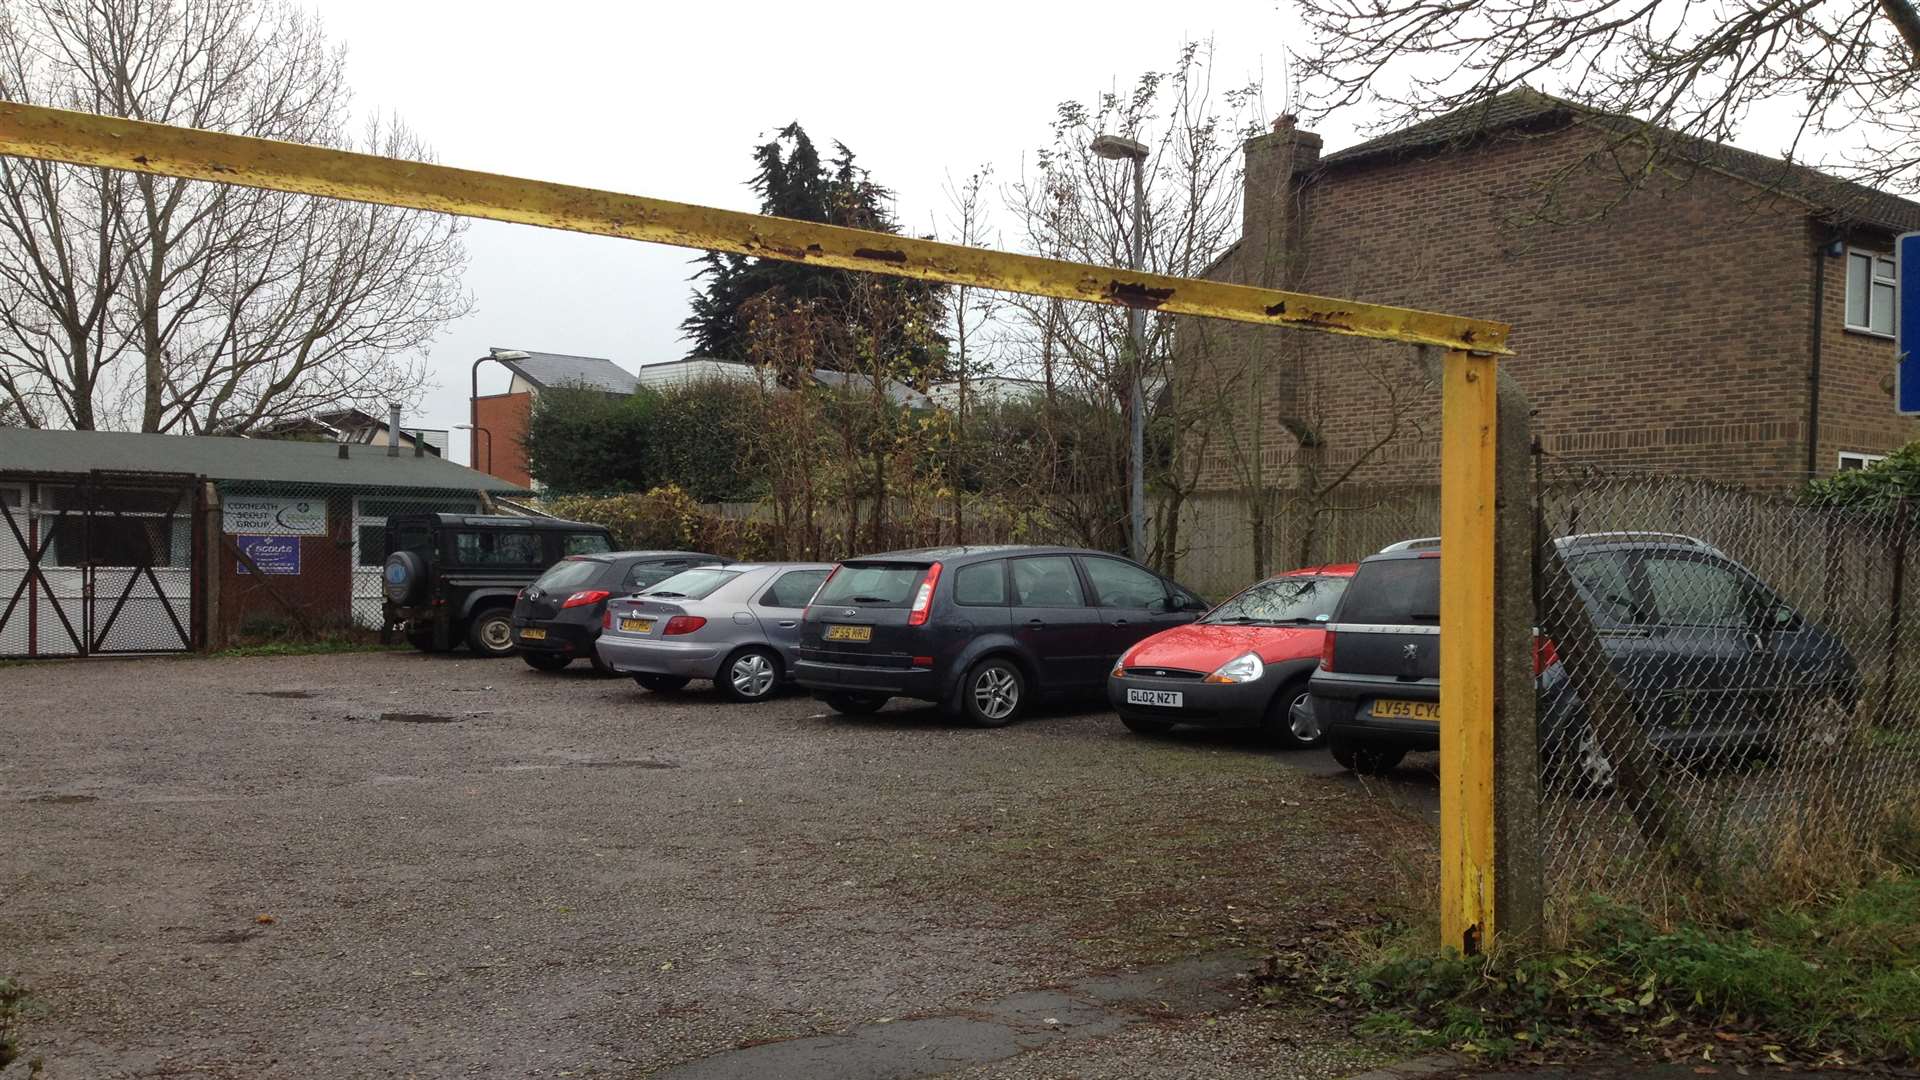 Witness reports suggest the man had park in the car park of the scout hut